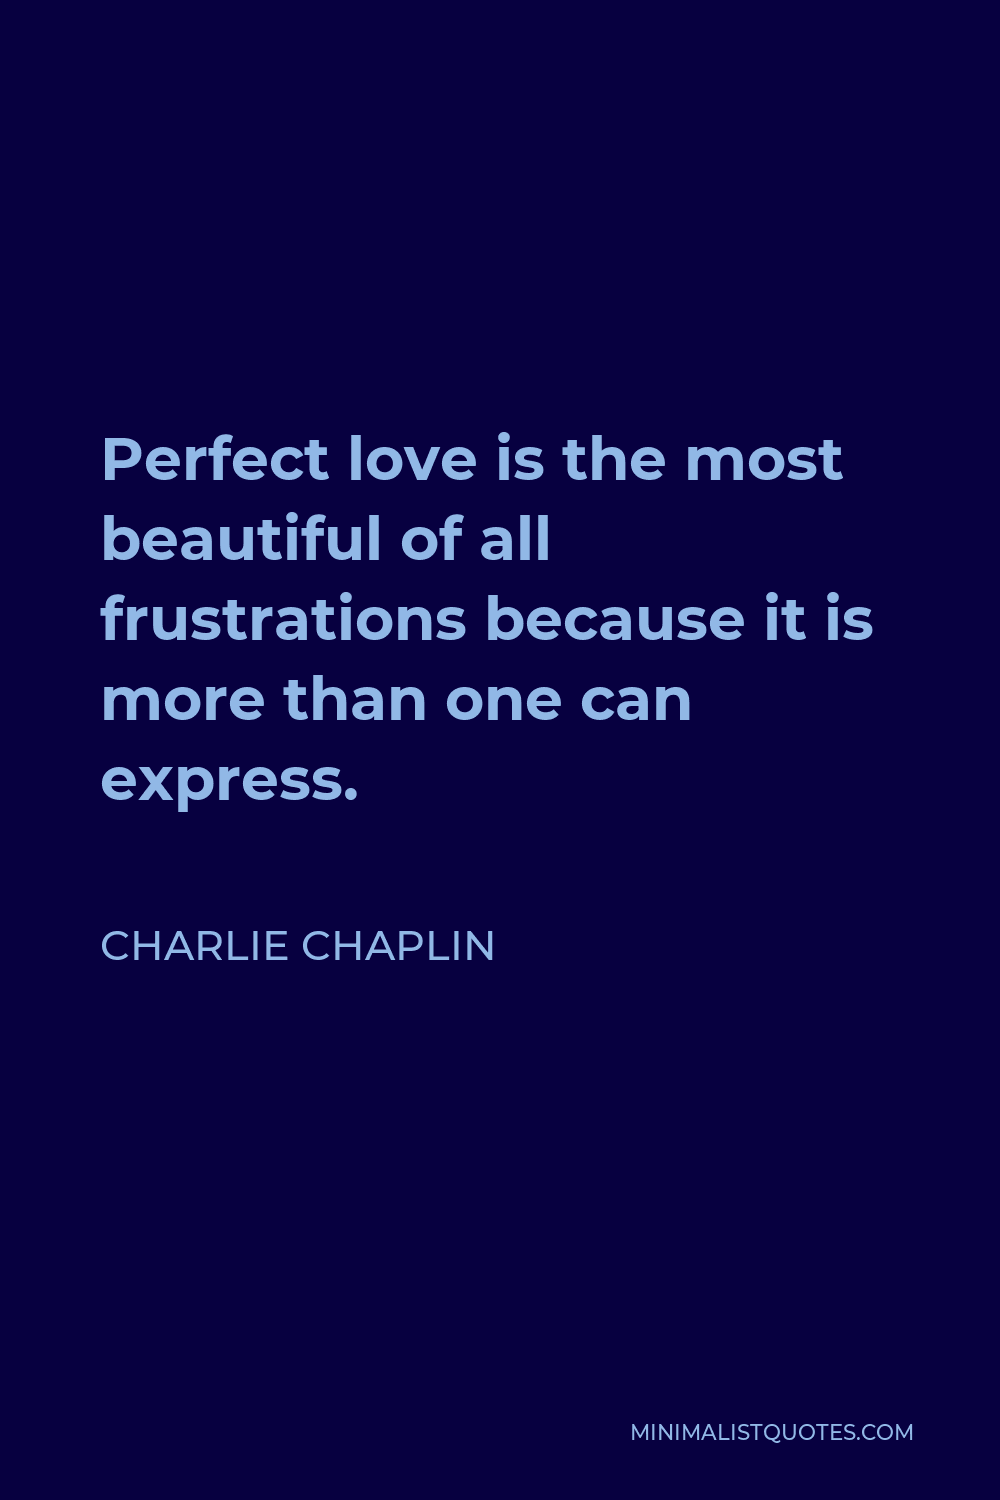 Charlie Chaplin Quote: Perfect love is the most beautiful of all ...